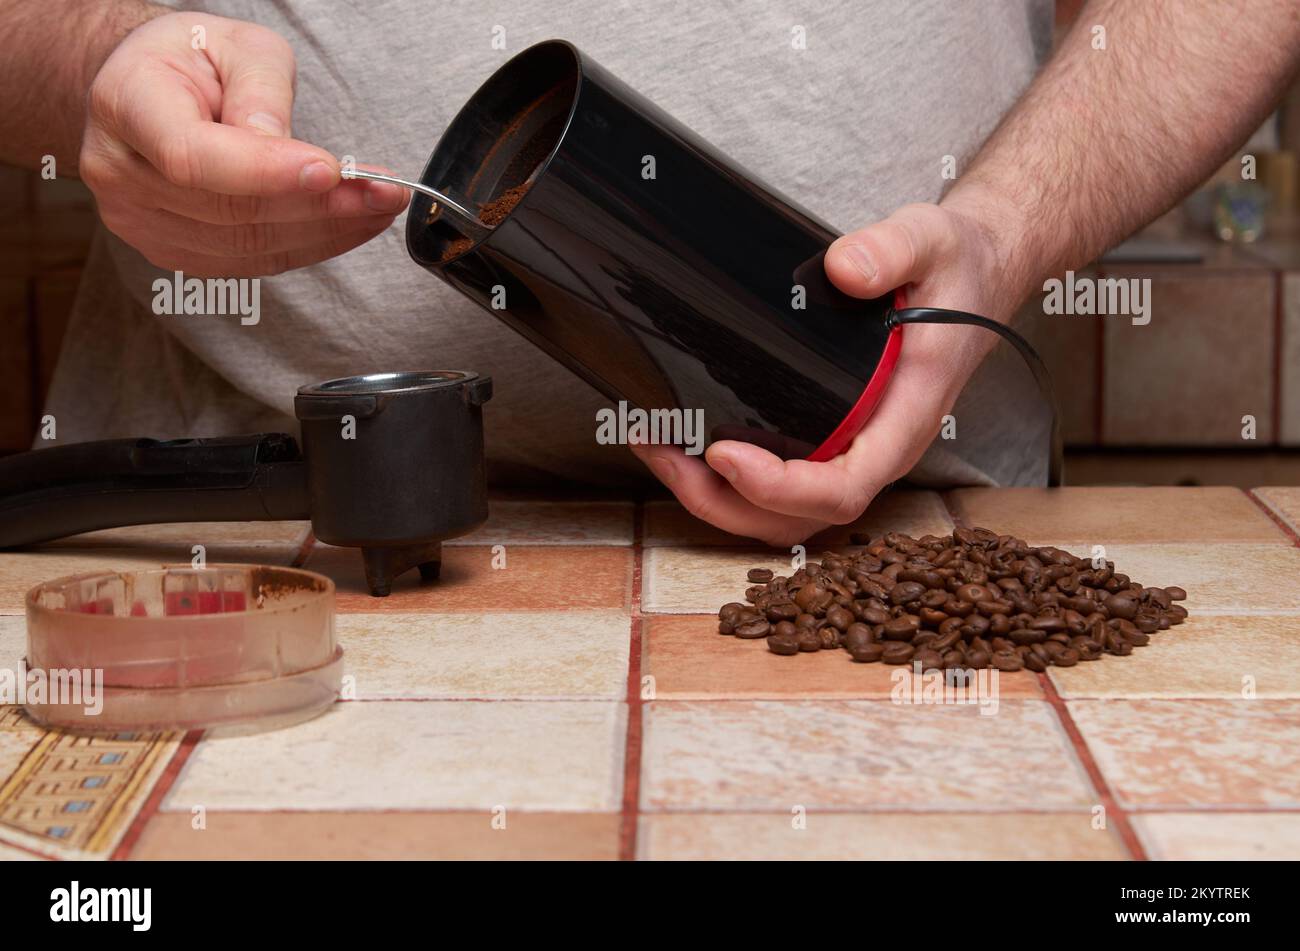 Preparation of coffee: male hands pour ground coffee into the horn of the coffee maker. Coffee beans, an electric coffee grinder, and a white cup and Stock Photo